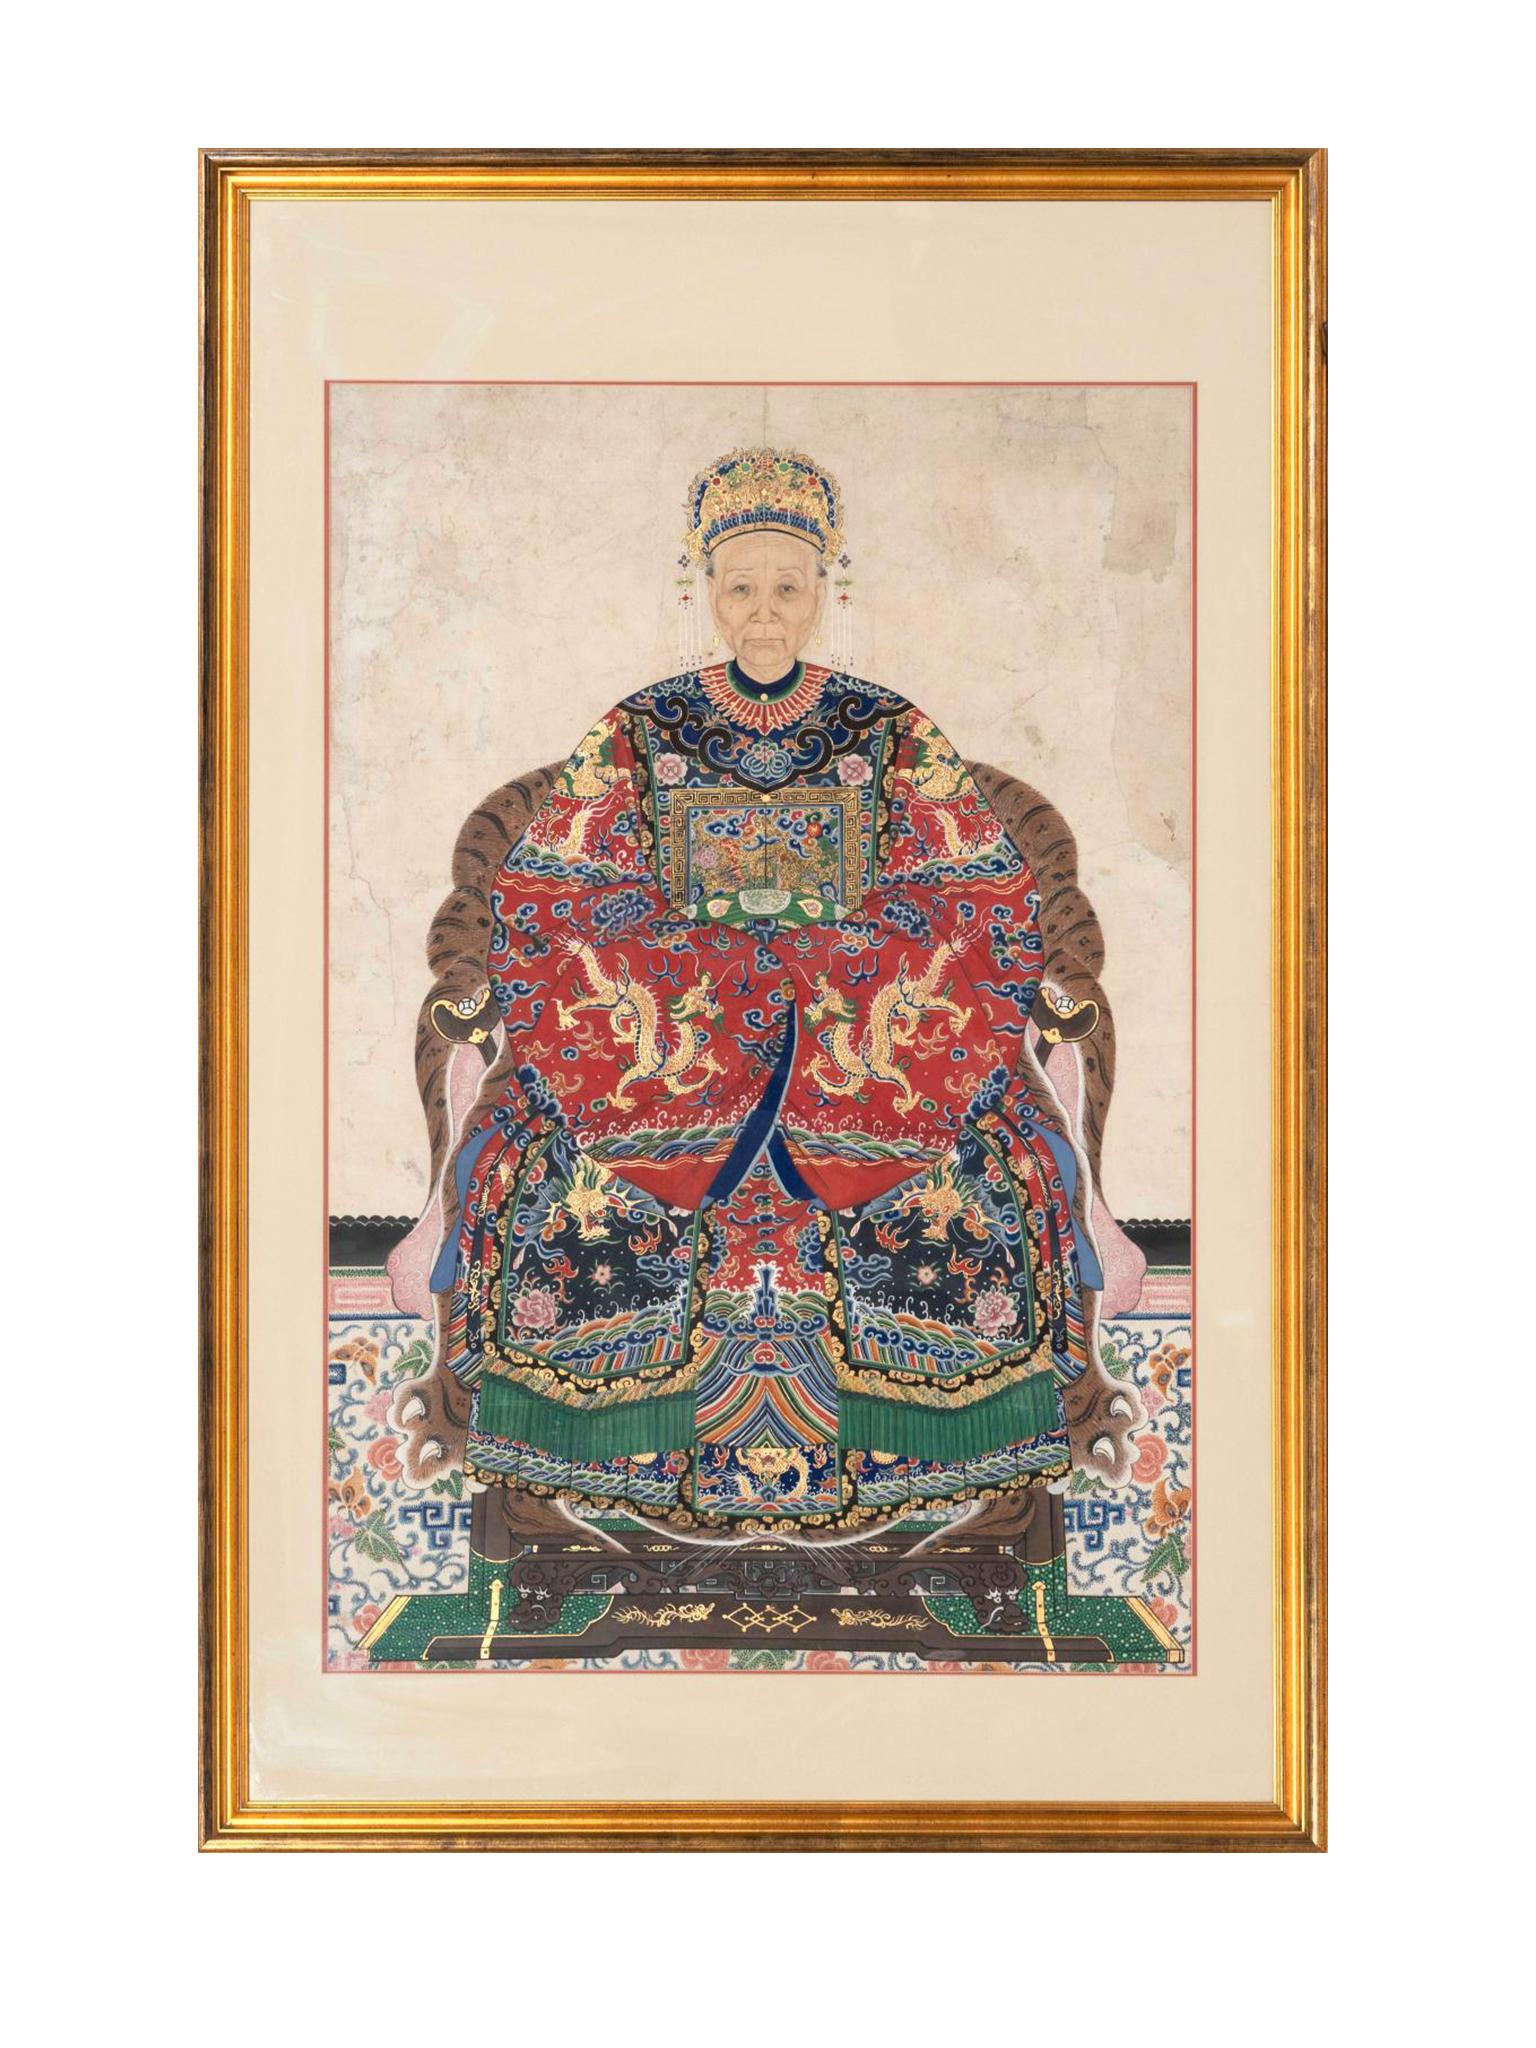 A pair of Chinese ancestral portraits, painted in the 19th century during the Qing Dynasty era. The portraits are rendered in watercolors and gouaches on paper. Each seated figure is dressed in richly hued robes. The Mandarin duck insignia adorns